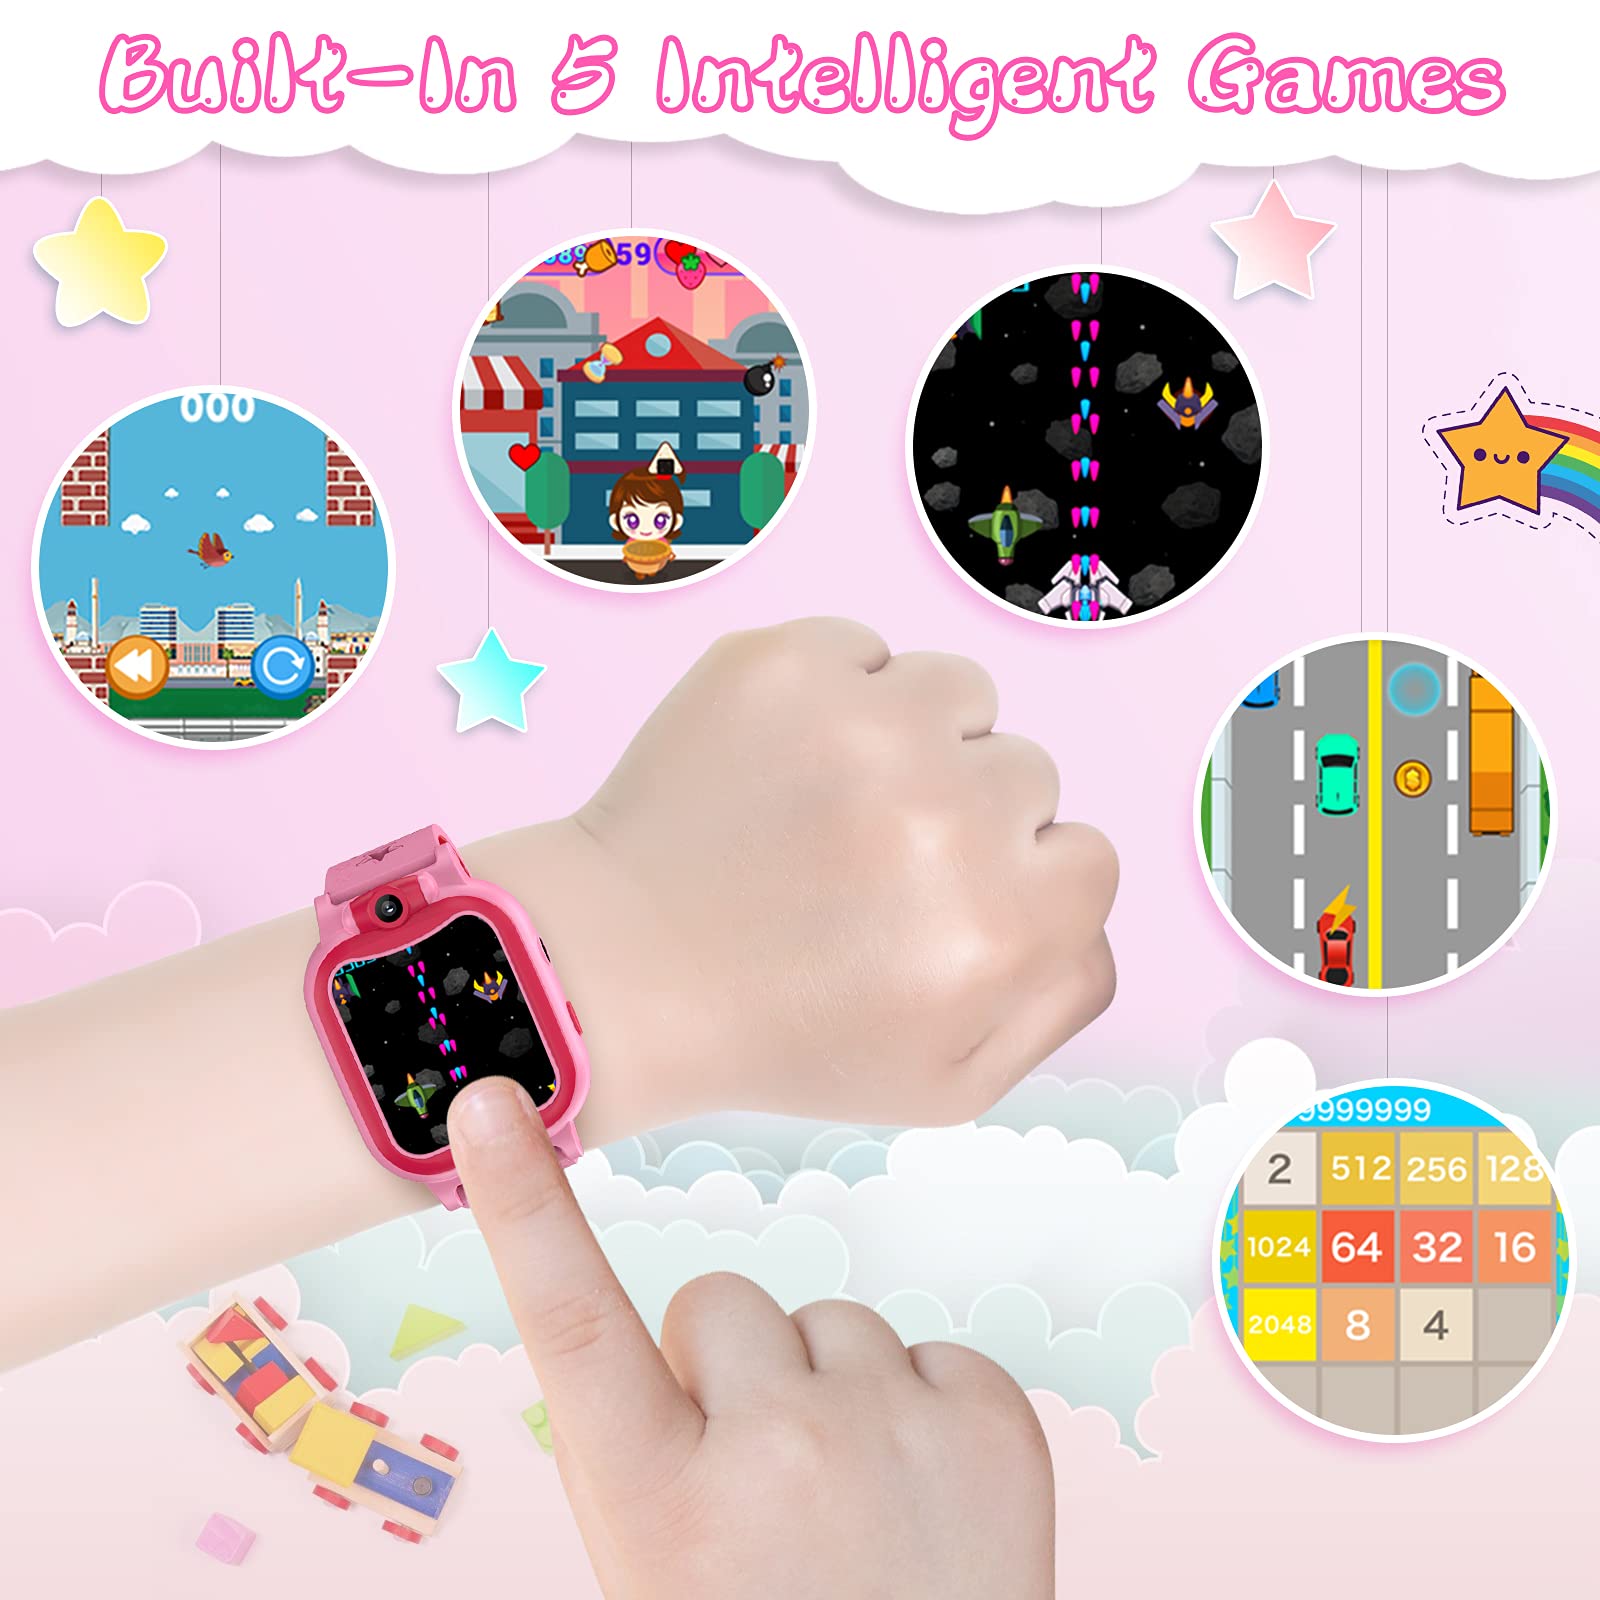 Kids Smart Watch Girls 3-10 Years,Touchscreen Toddler Digital Sport SmartWatch with Music Pedometer Games for Age 4 5 6 7 8 9 10 Years Children Birthday Gifts - Pink